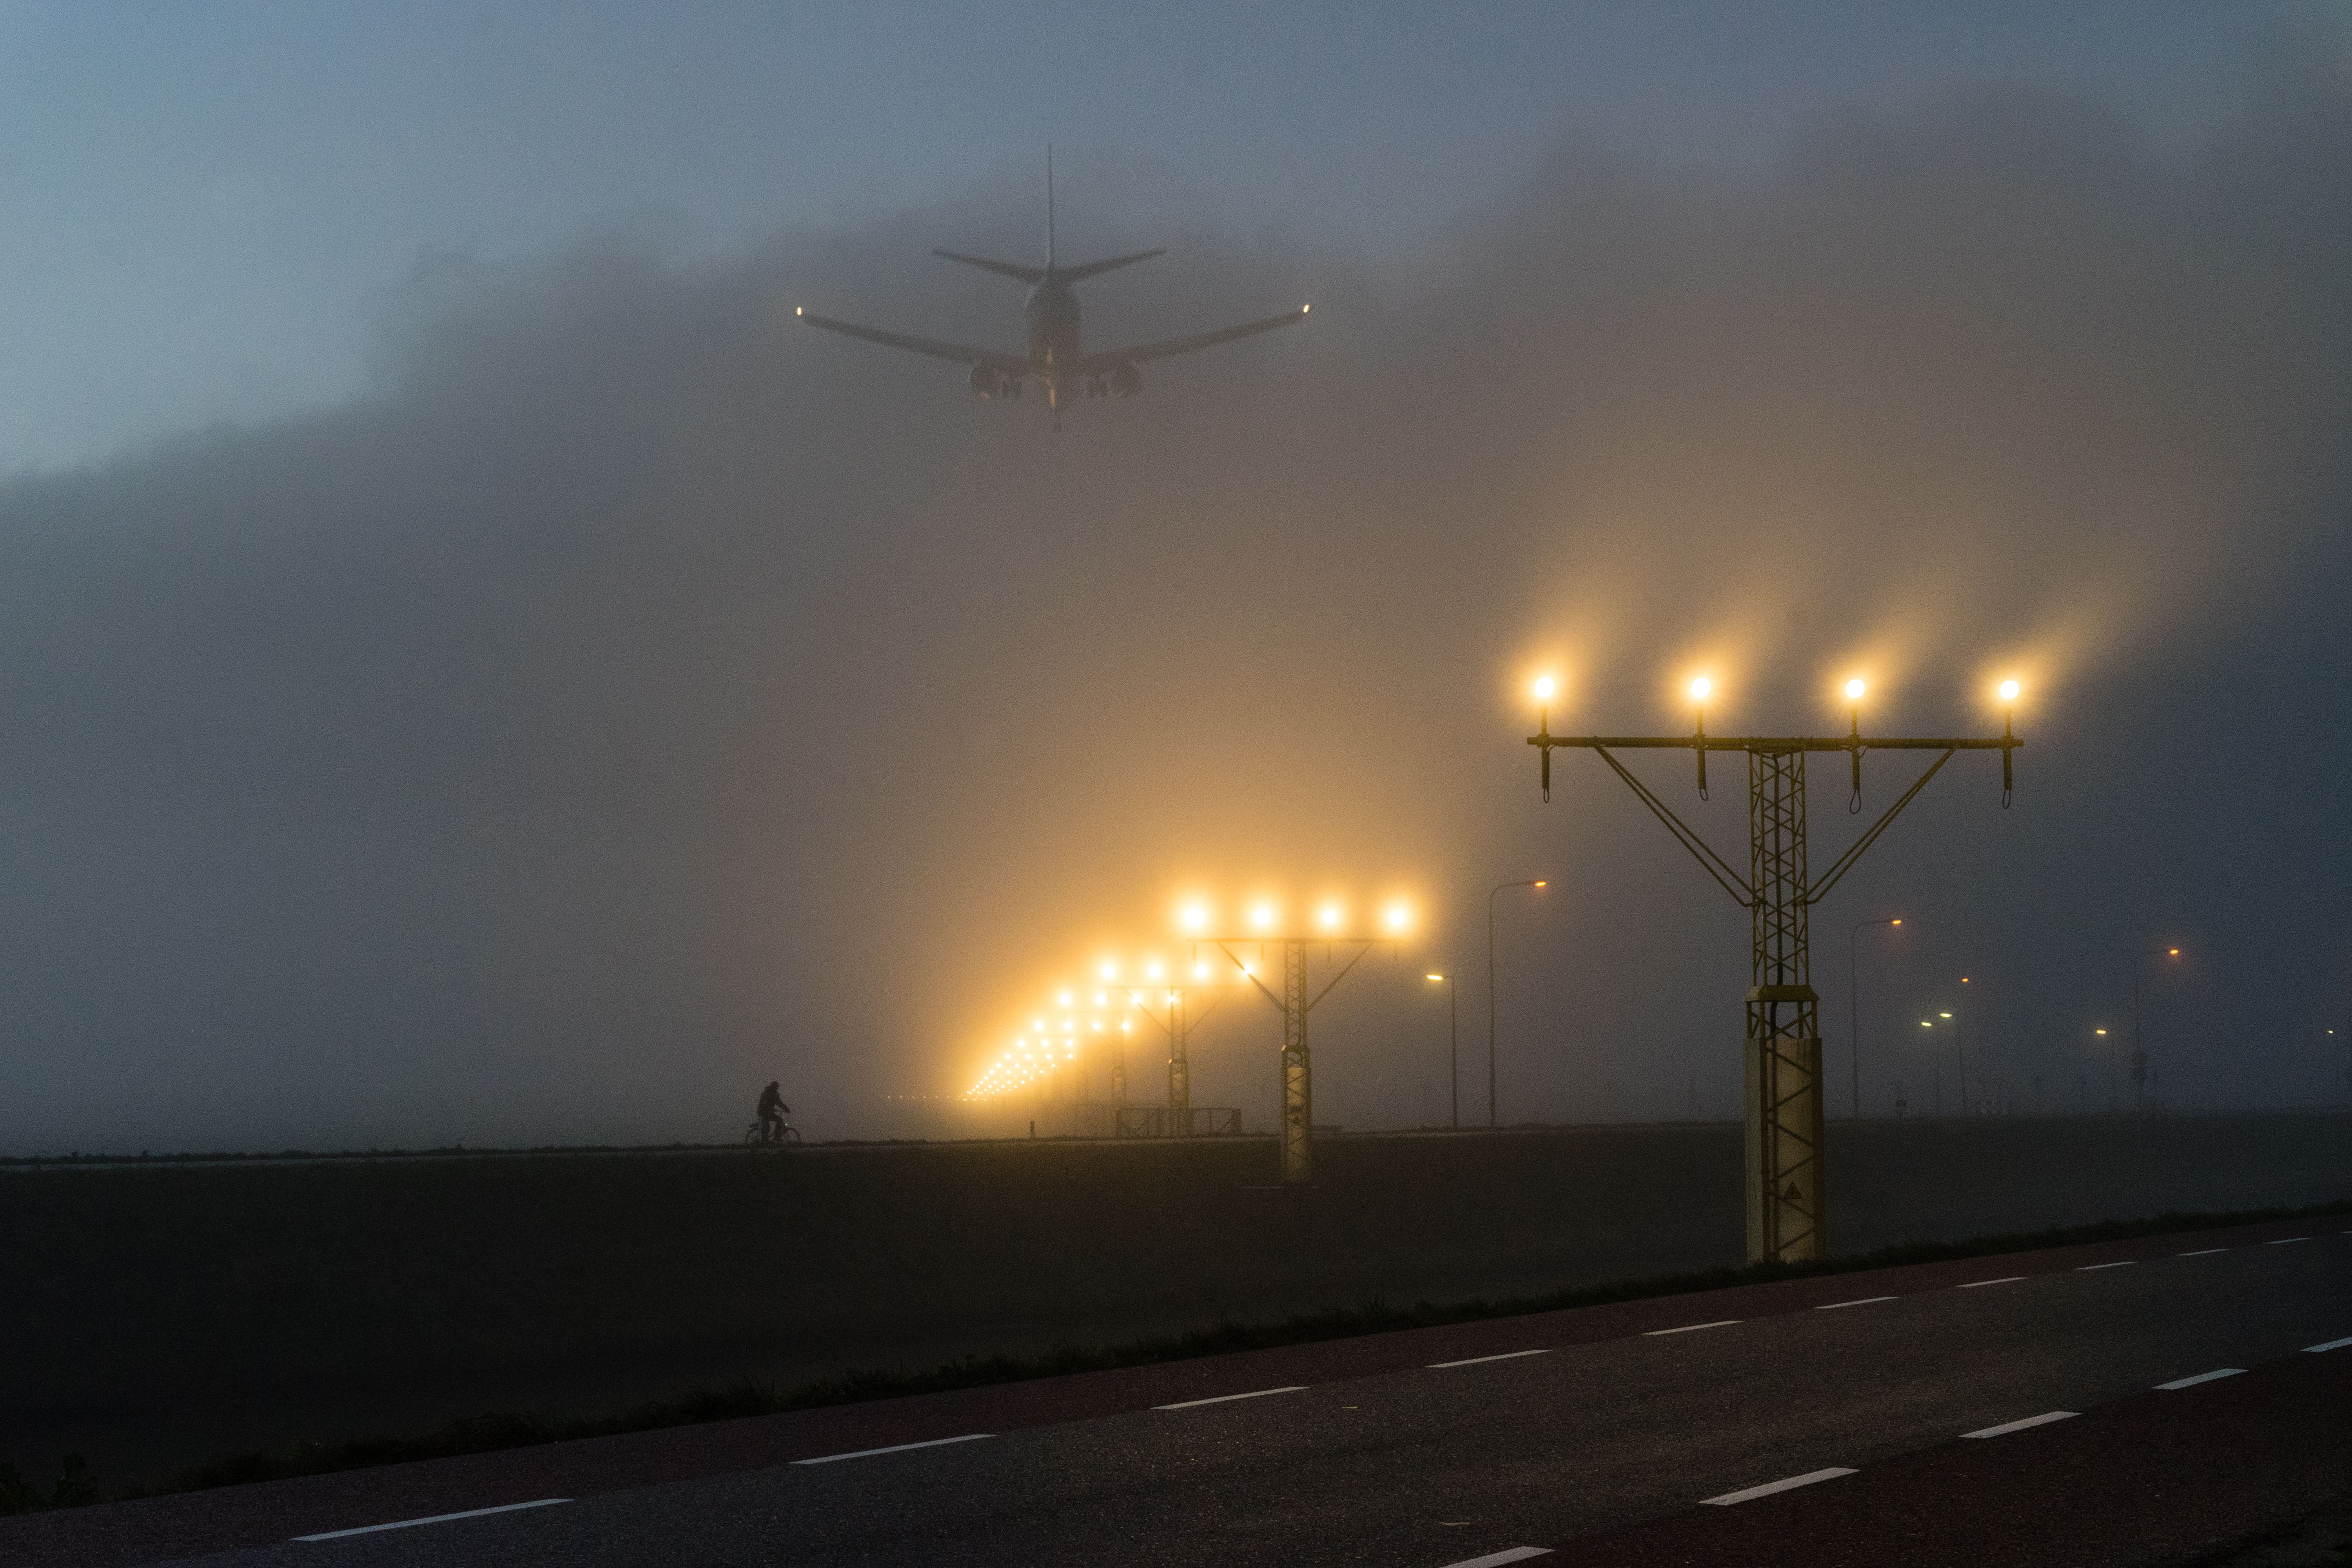 A plane landing in foggy conditions.